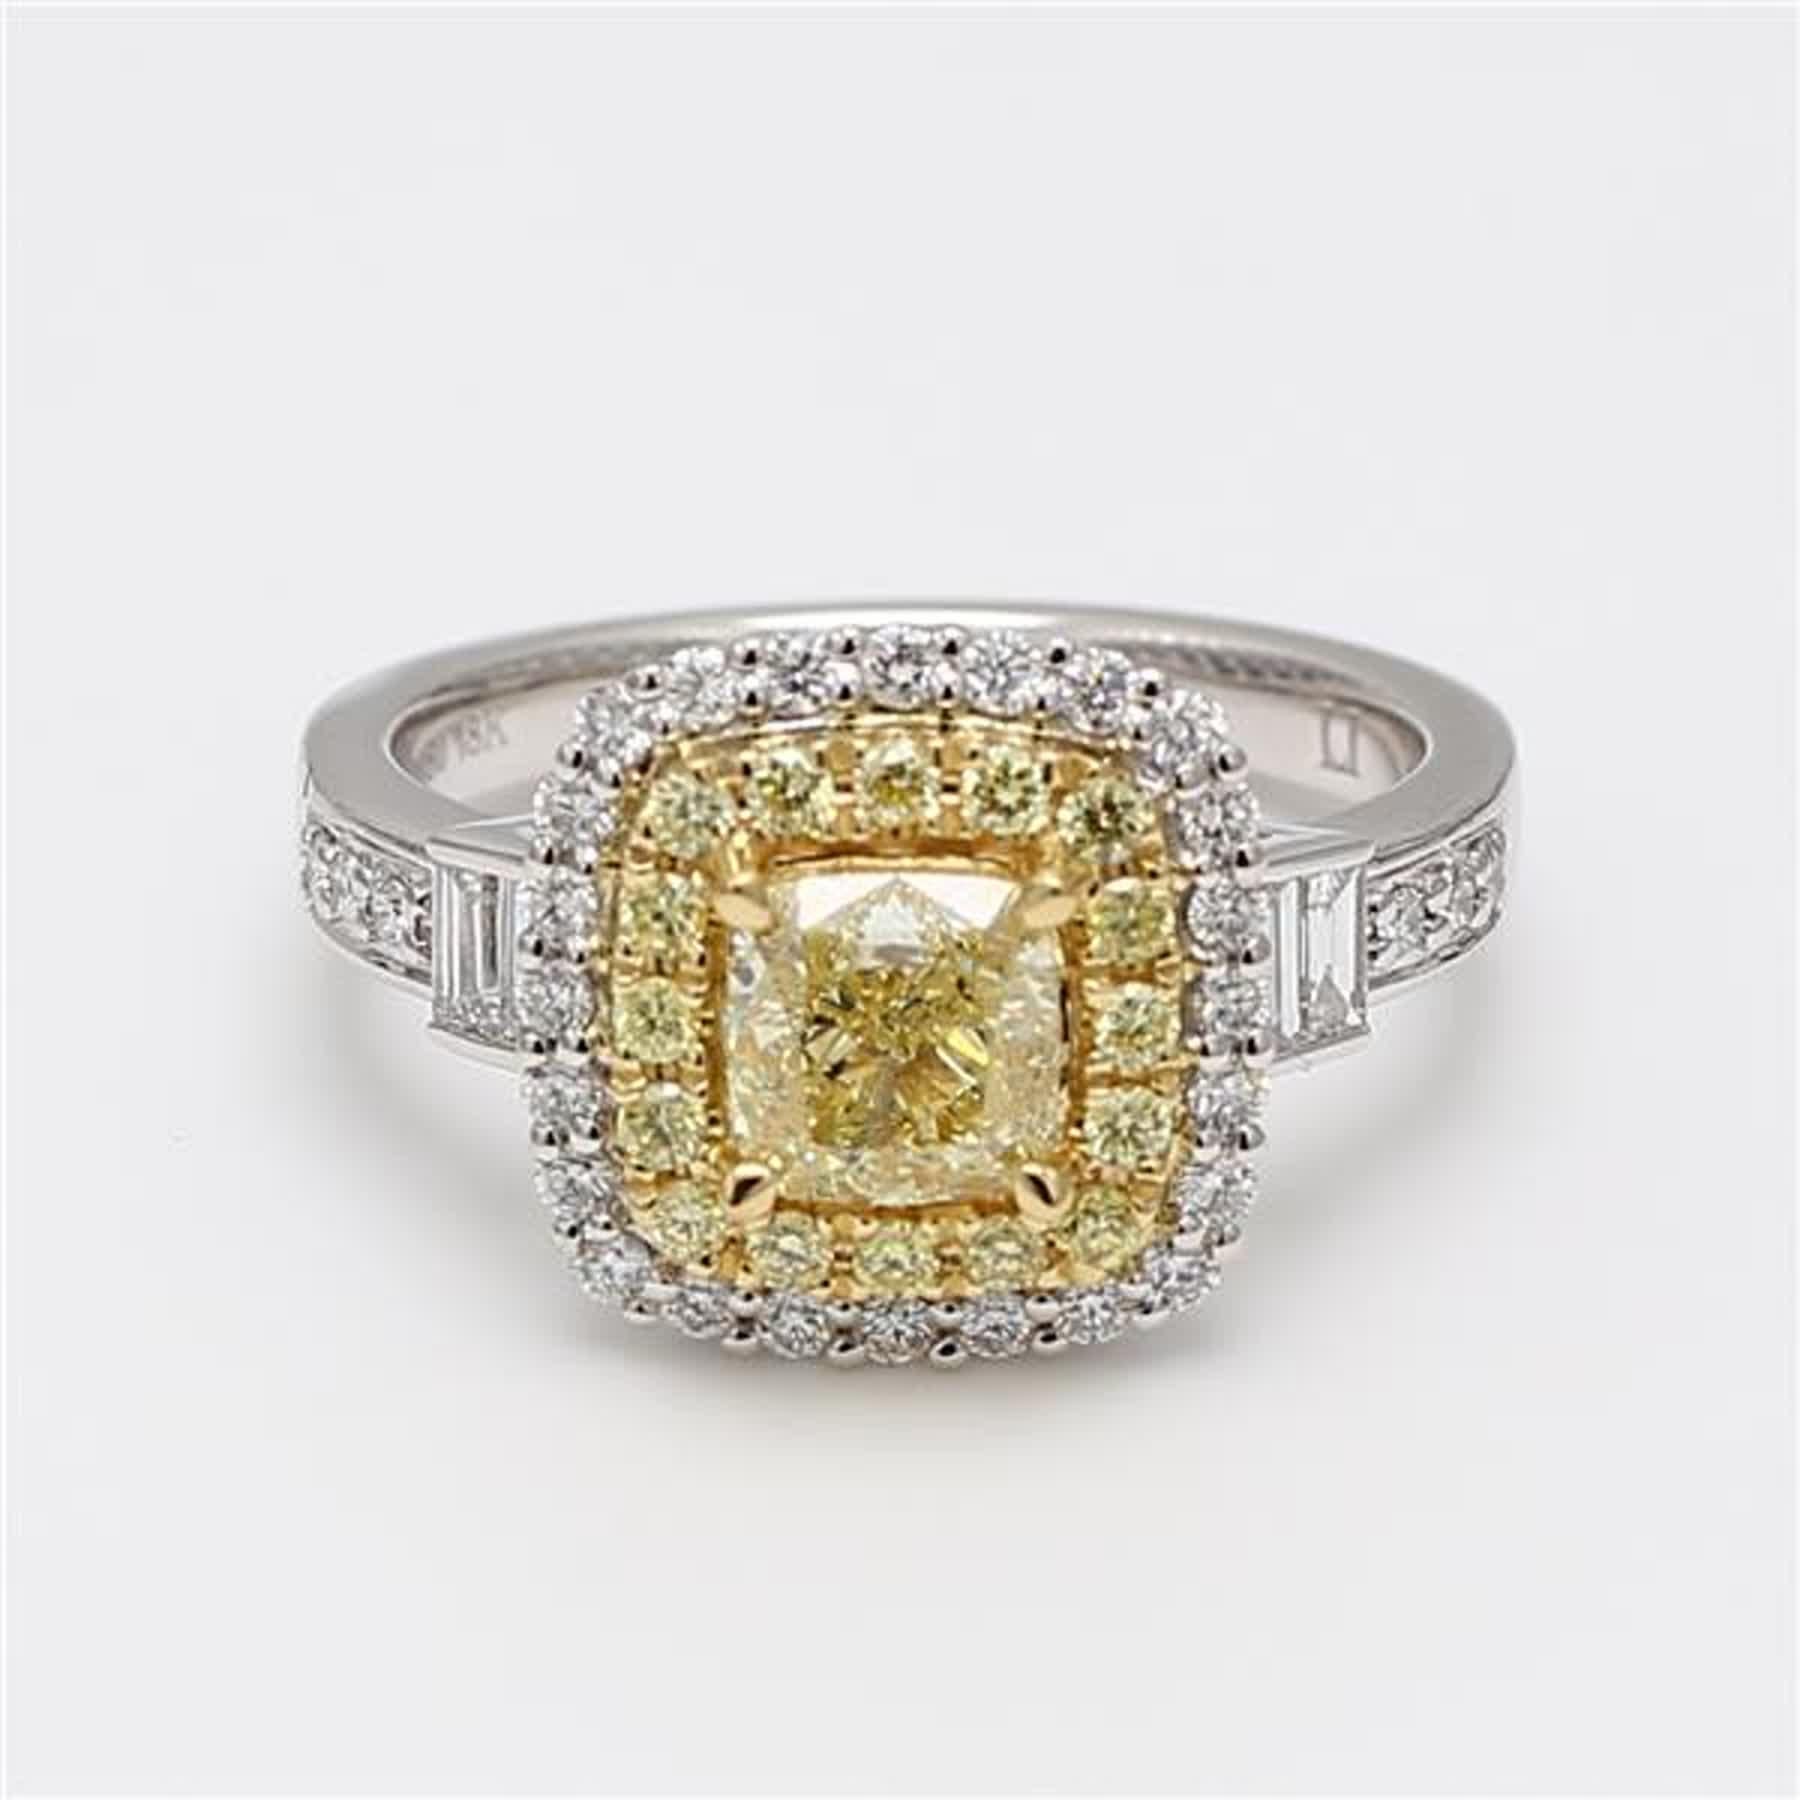 RareGemWorld's classic GIA certified diamond ring. Mounted in a beautiful 18K Yellow and White Gold and Platinum setting with a natural cushion cut yellow diamond. The yellow diamond is surrounded by natural baguette cut white diamonds, round